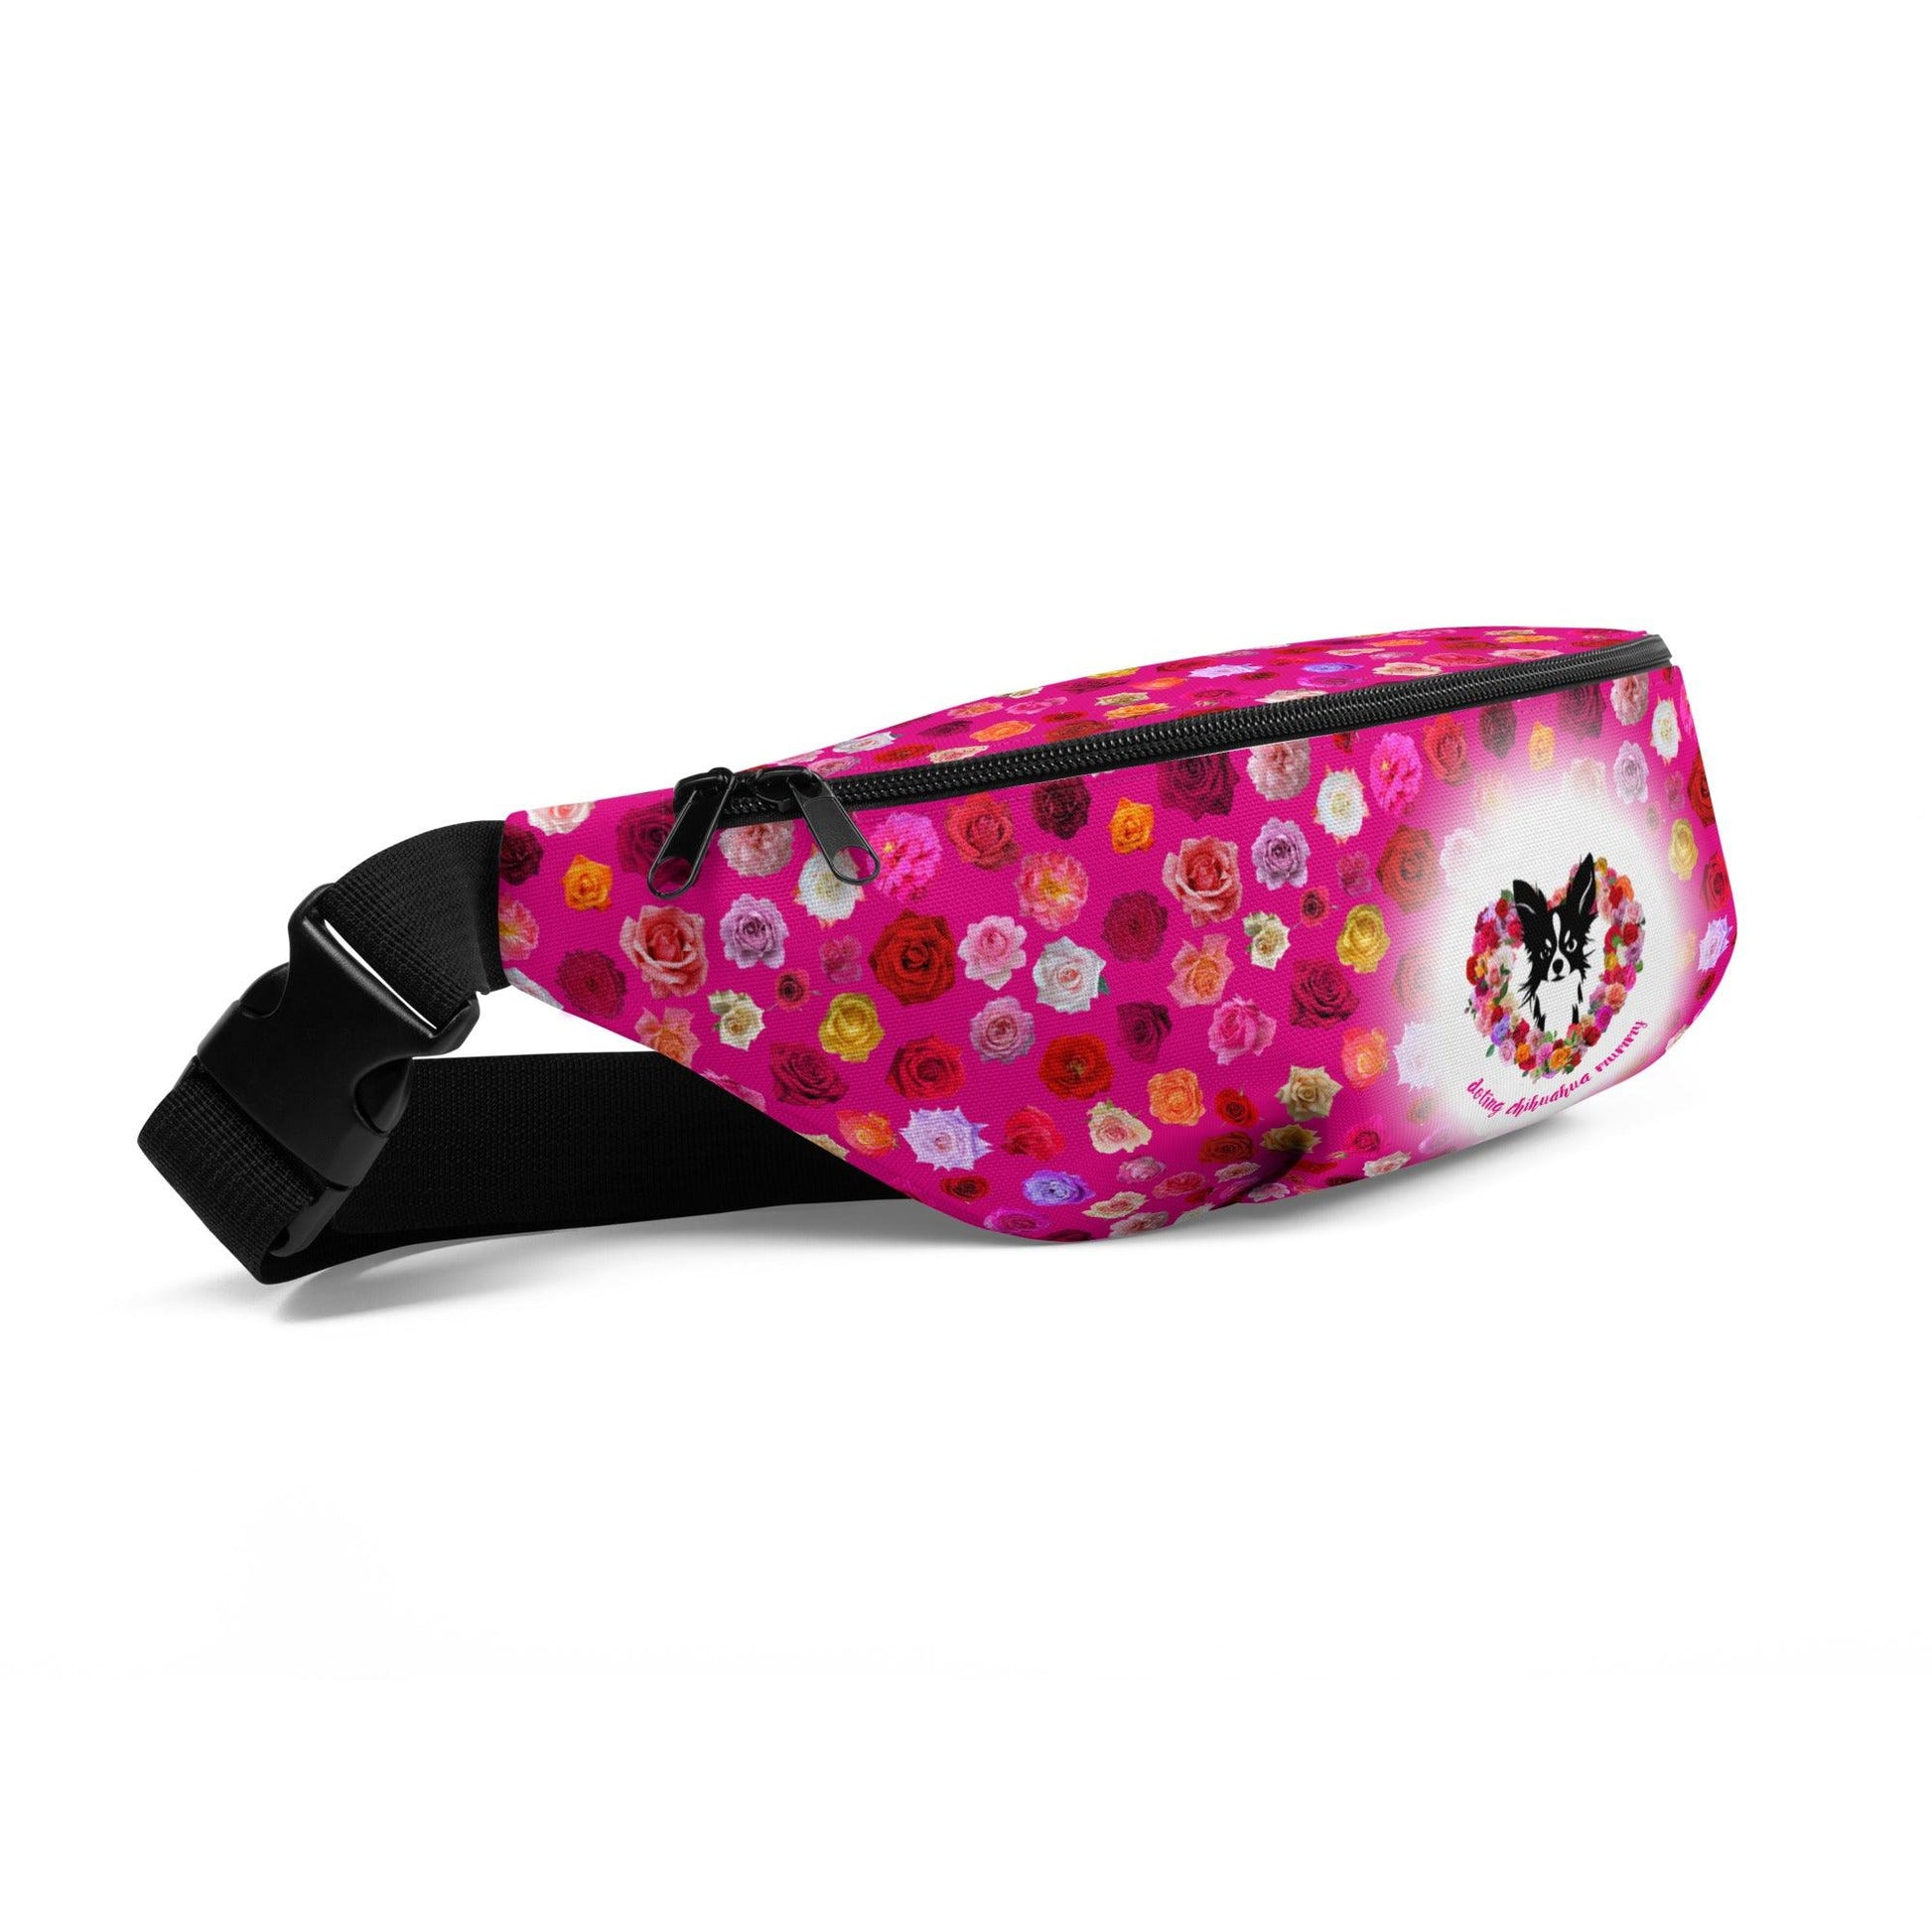 There's something so special about the bond between a girl and her chi baby. Being such ridiculously cute little dogs, chihuahuas charm their way deep into their mum's heart. This funky fanny pack is covered in ditsy roses. The front features a black and white longhaired chihuahua surrounded by a love heart of roses and the words "doting chihuahua mummy". An adorable Mother's Day / birthday / Christmas gift for a doting chihuahua mum. "Aw" guaranteed! Design by Renate Kriegler for Chimigos.